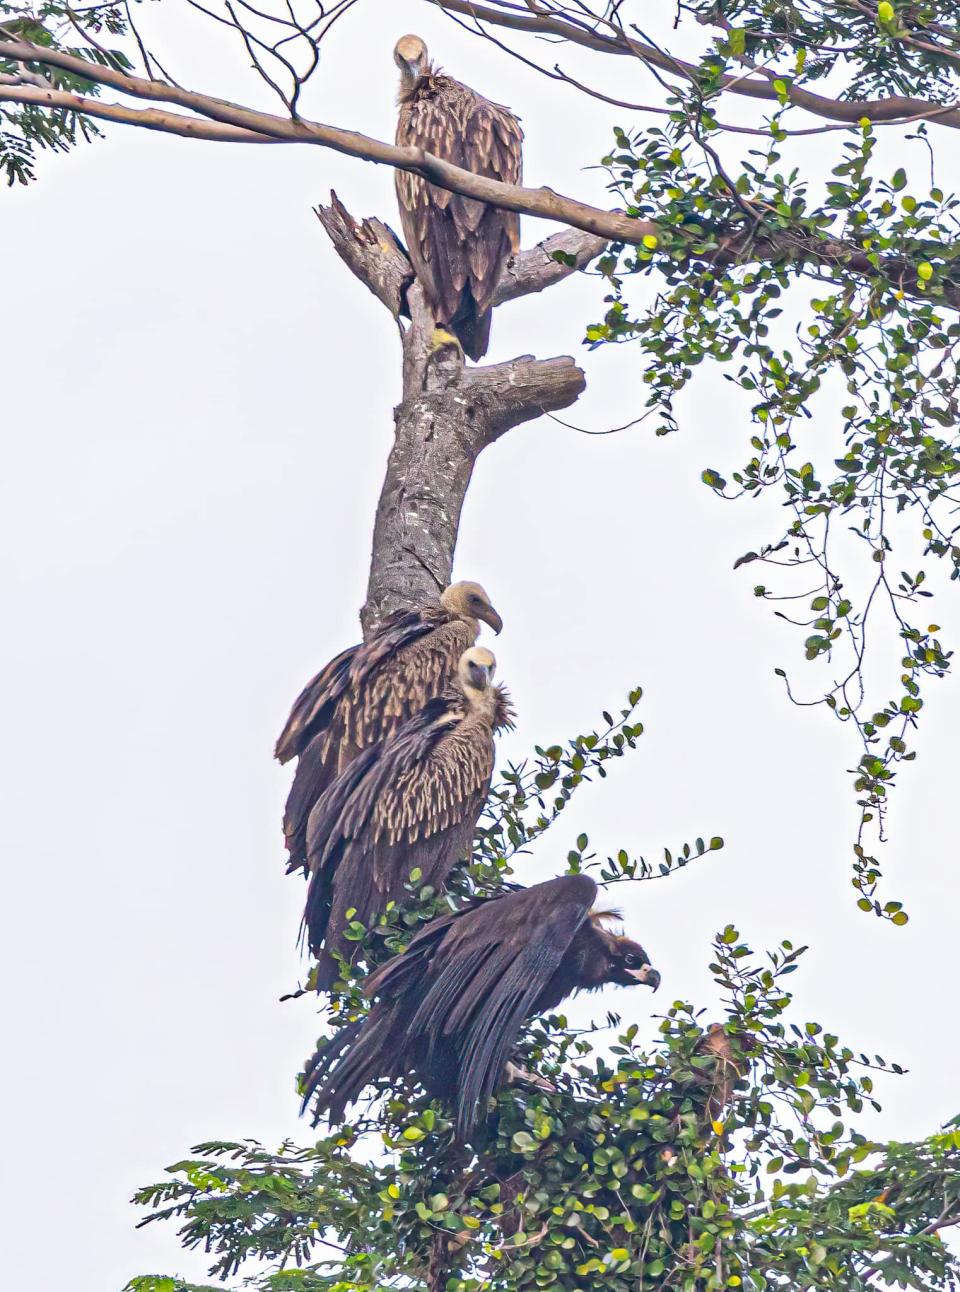 Himalayan vultures and solitary monk vulture (bottom) in the Singapore Botanic Gardens, December 30, 2021 (Photo: Shiu Ling / Facebook)